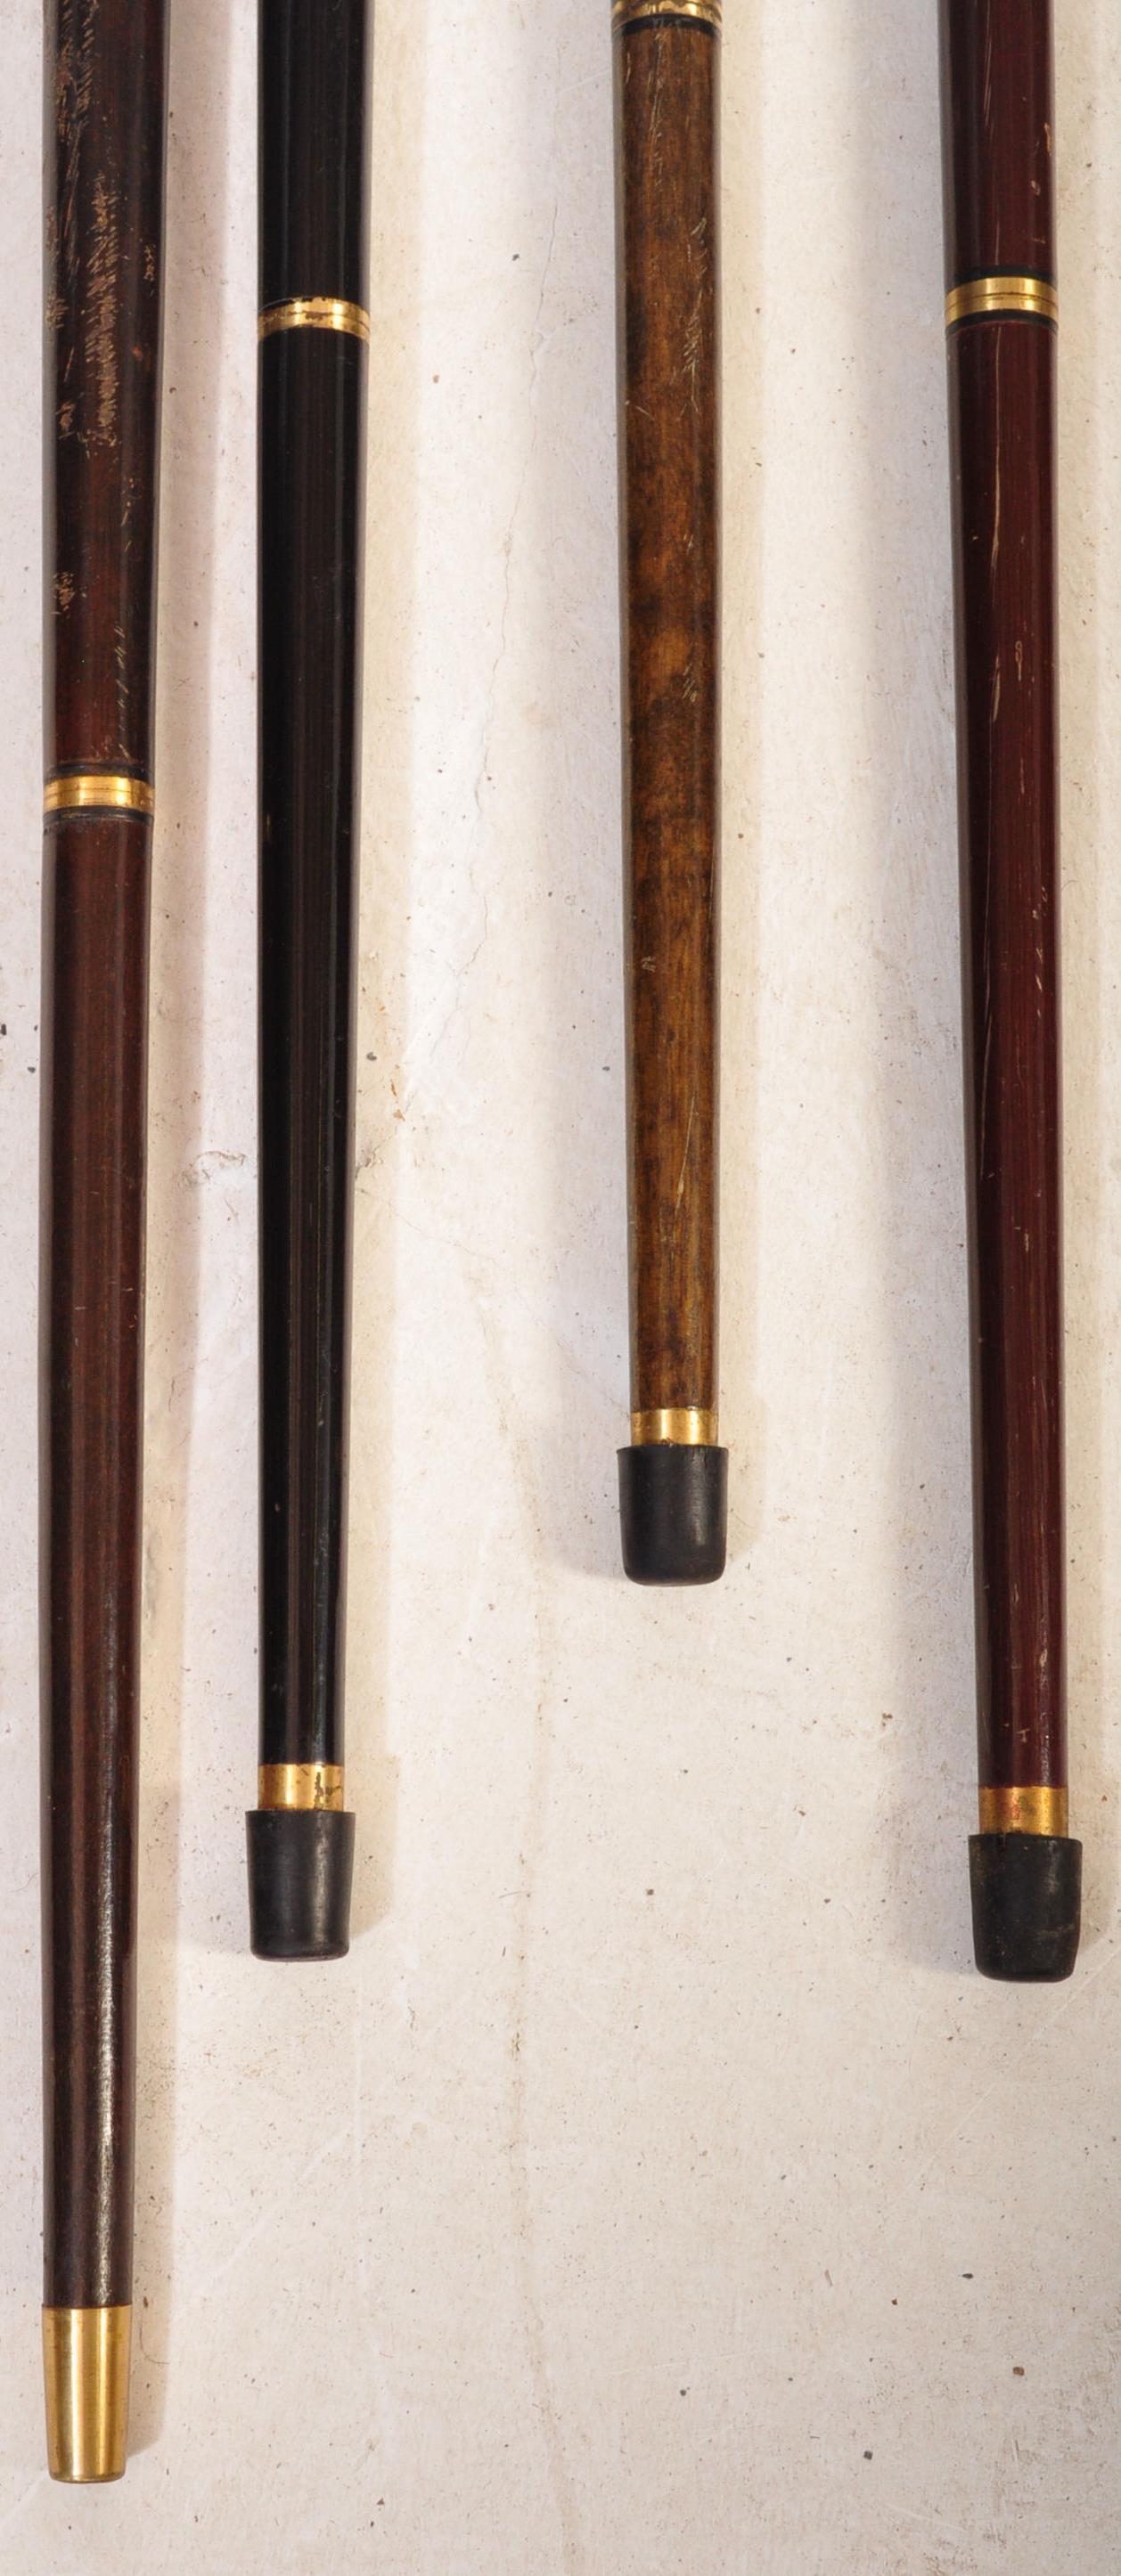 COLLECTION OF VINTAGE 20TH CENTURY WALKING STICKS - Image 6 of 8